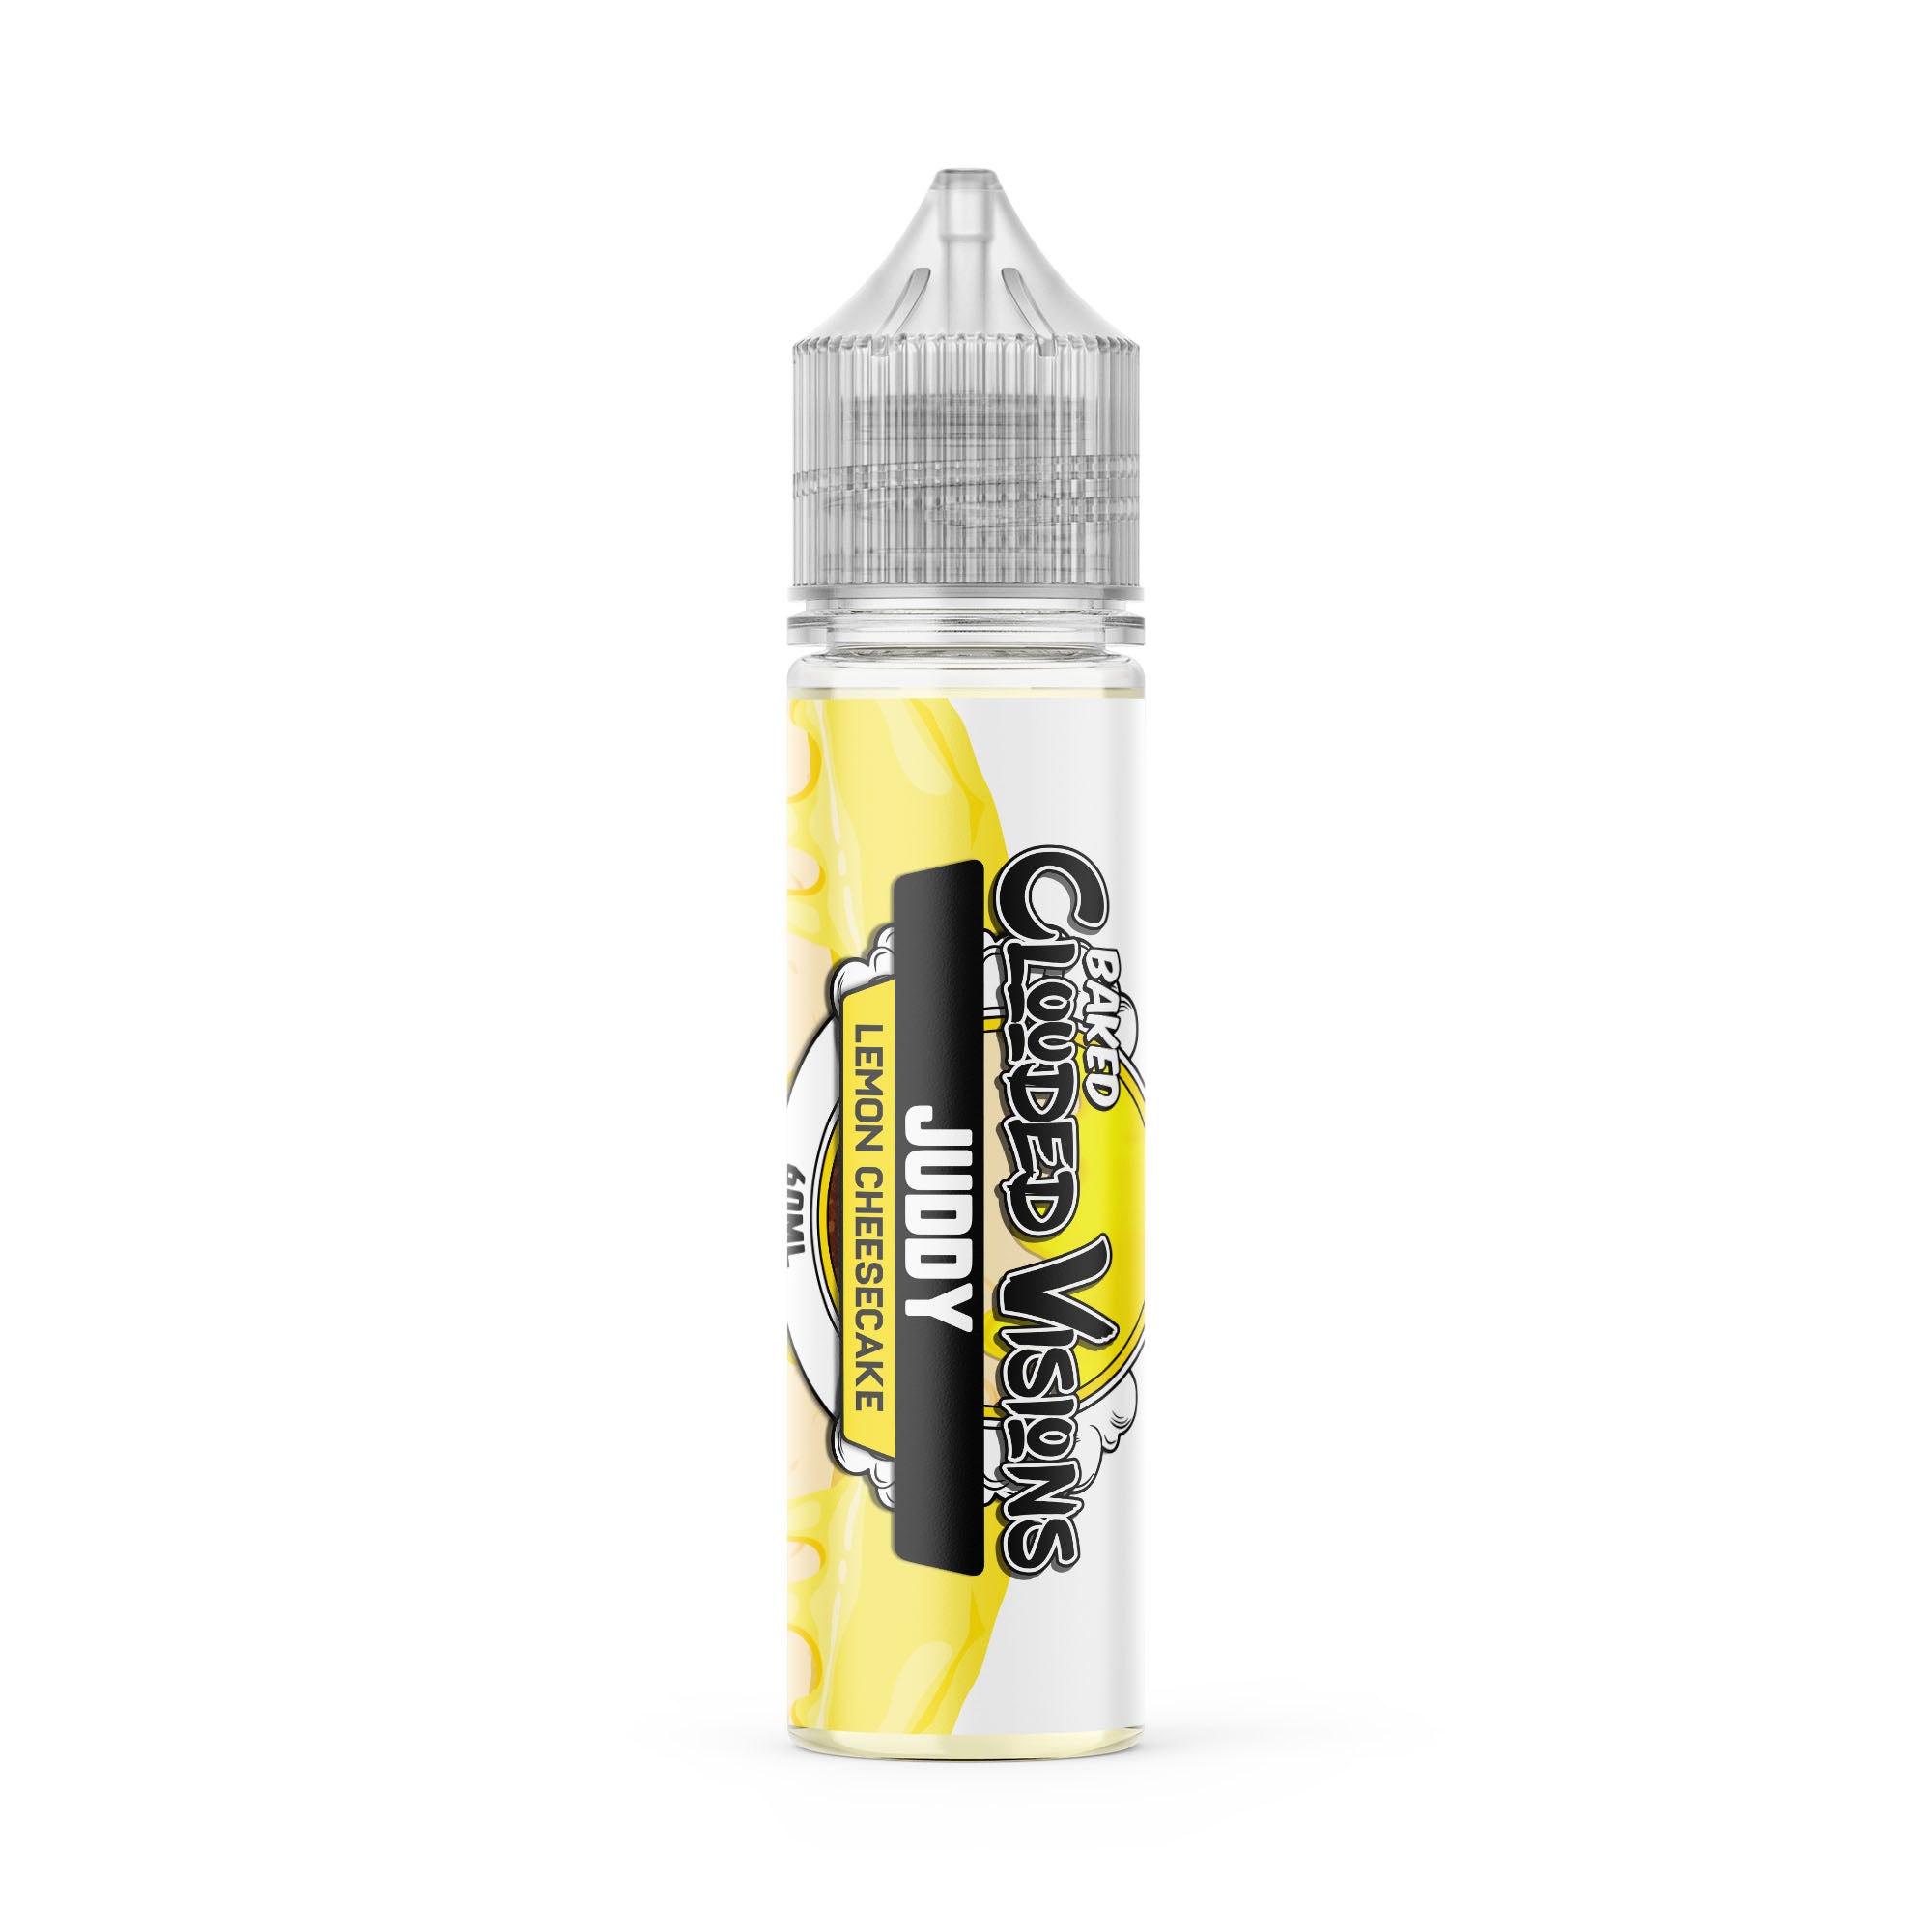 Clouded Visions | The Originals | Juddy | 60ml | Wholesale